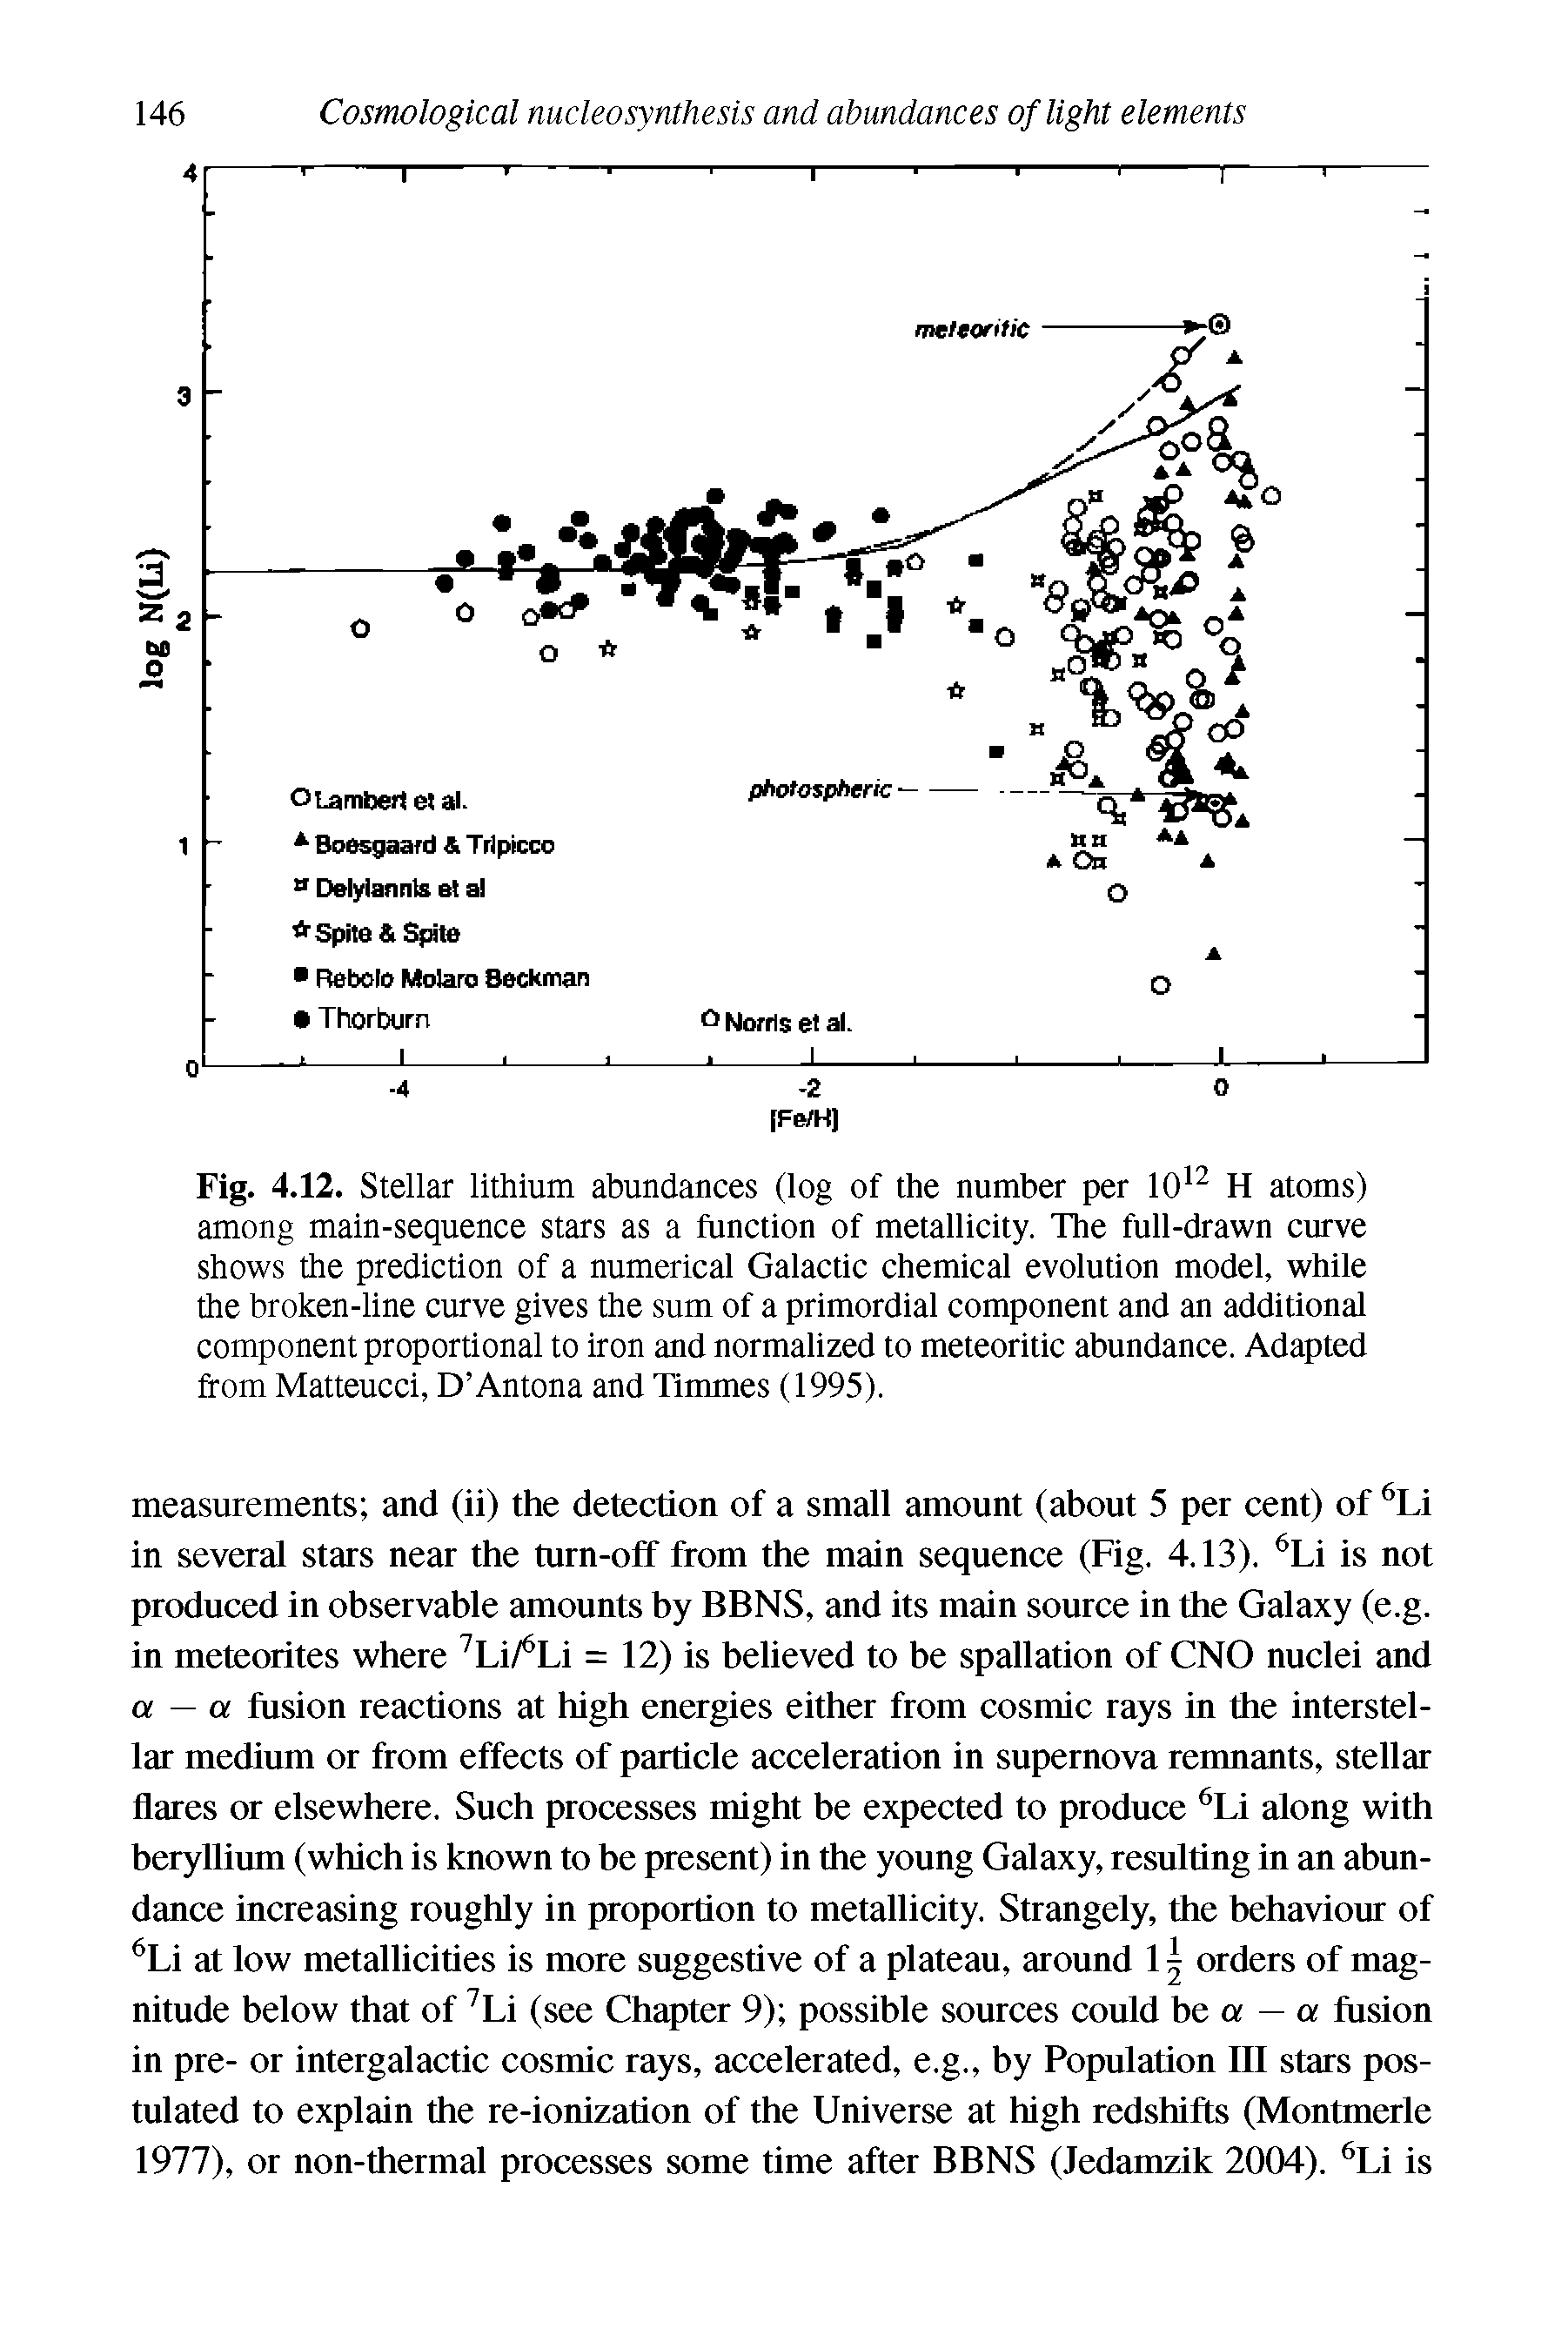 Fig. 4.12. Stellar lithium abundances (log of the number per 1012 H atoms) among main-sequence stars as a function of metallicity. The full-drawn curve shows the prediction of a numerical Galactic chemical evolution model, while the broken-line curve gives the sum of a primordial component and an additional component proportional to iron and normalized to meteoritic abundance. Adapted from Matteucci, D Antona and Timmes (1995).